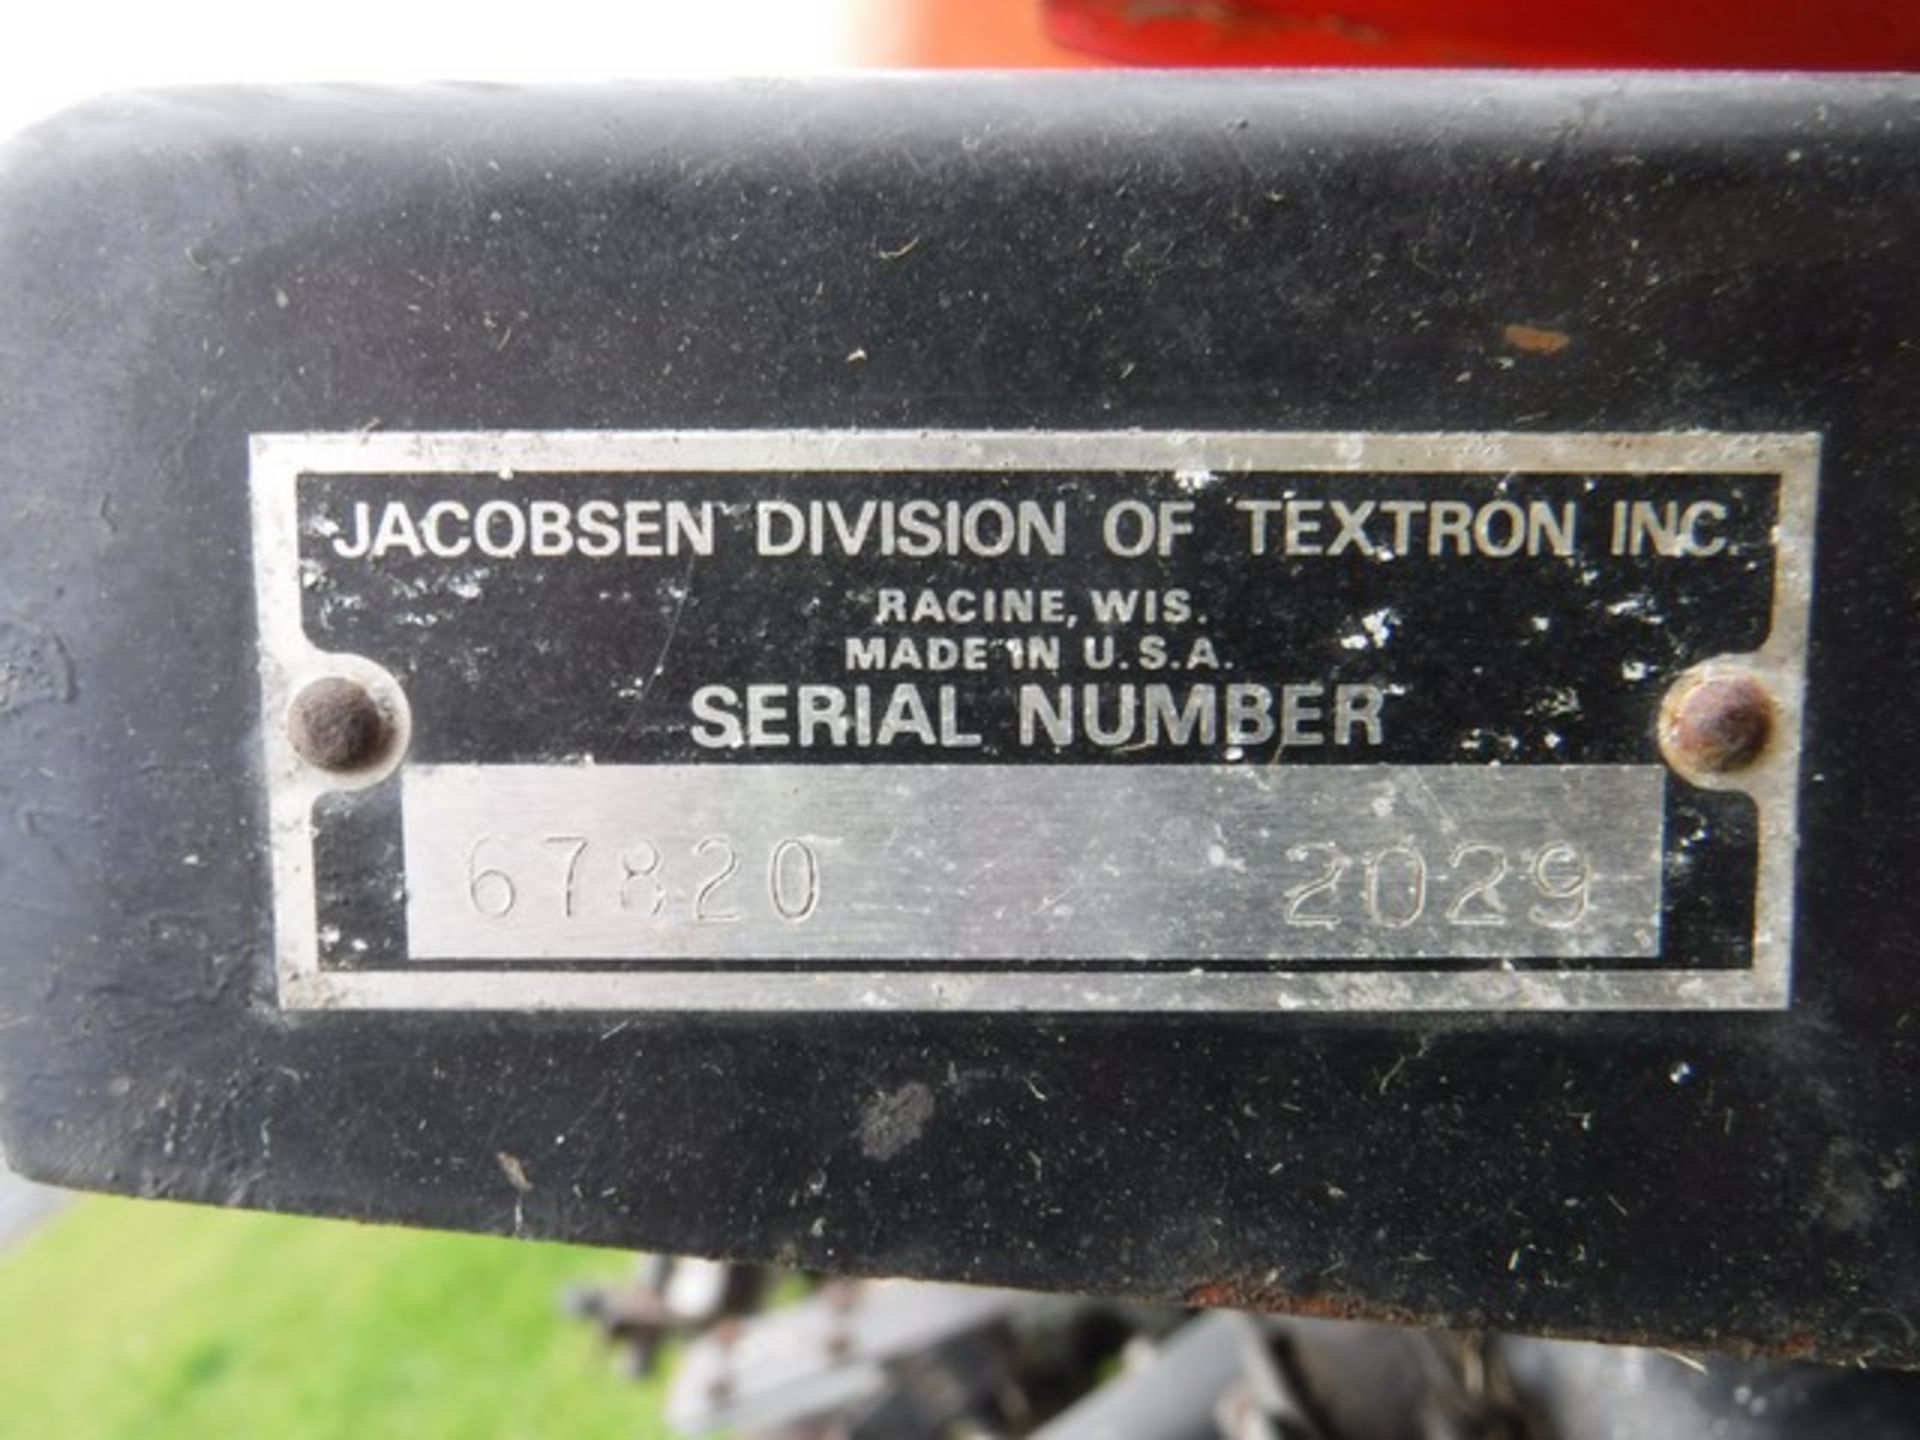 LF135 JACOBSEN FAIRWAY RIDE ON MOWER, 1647HRS (NOT VERIFIED) - Image 8 of 9